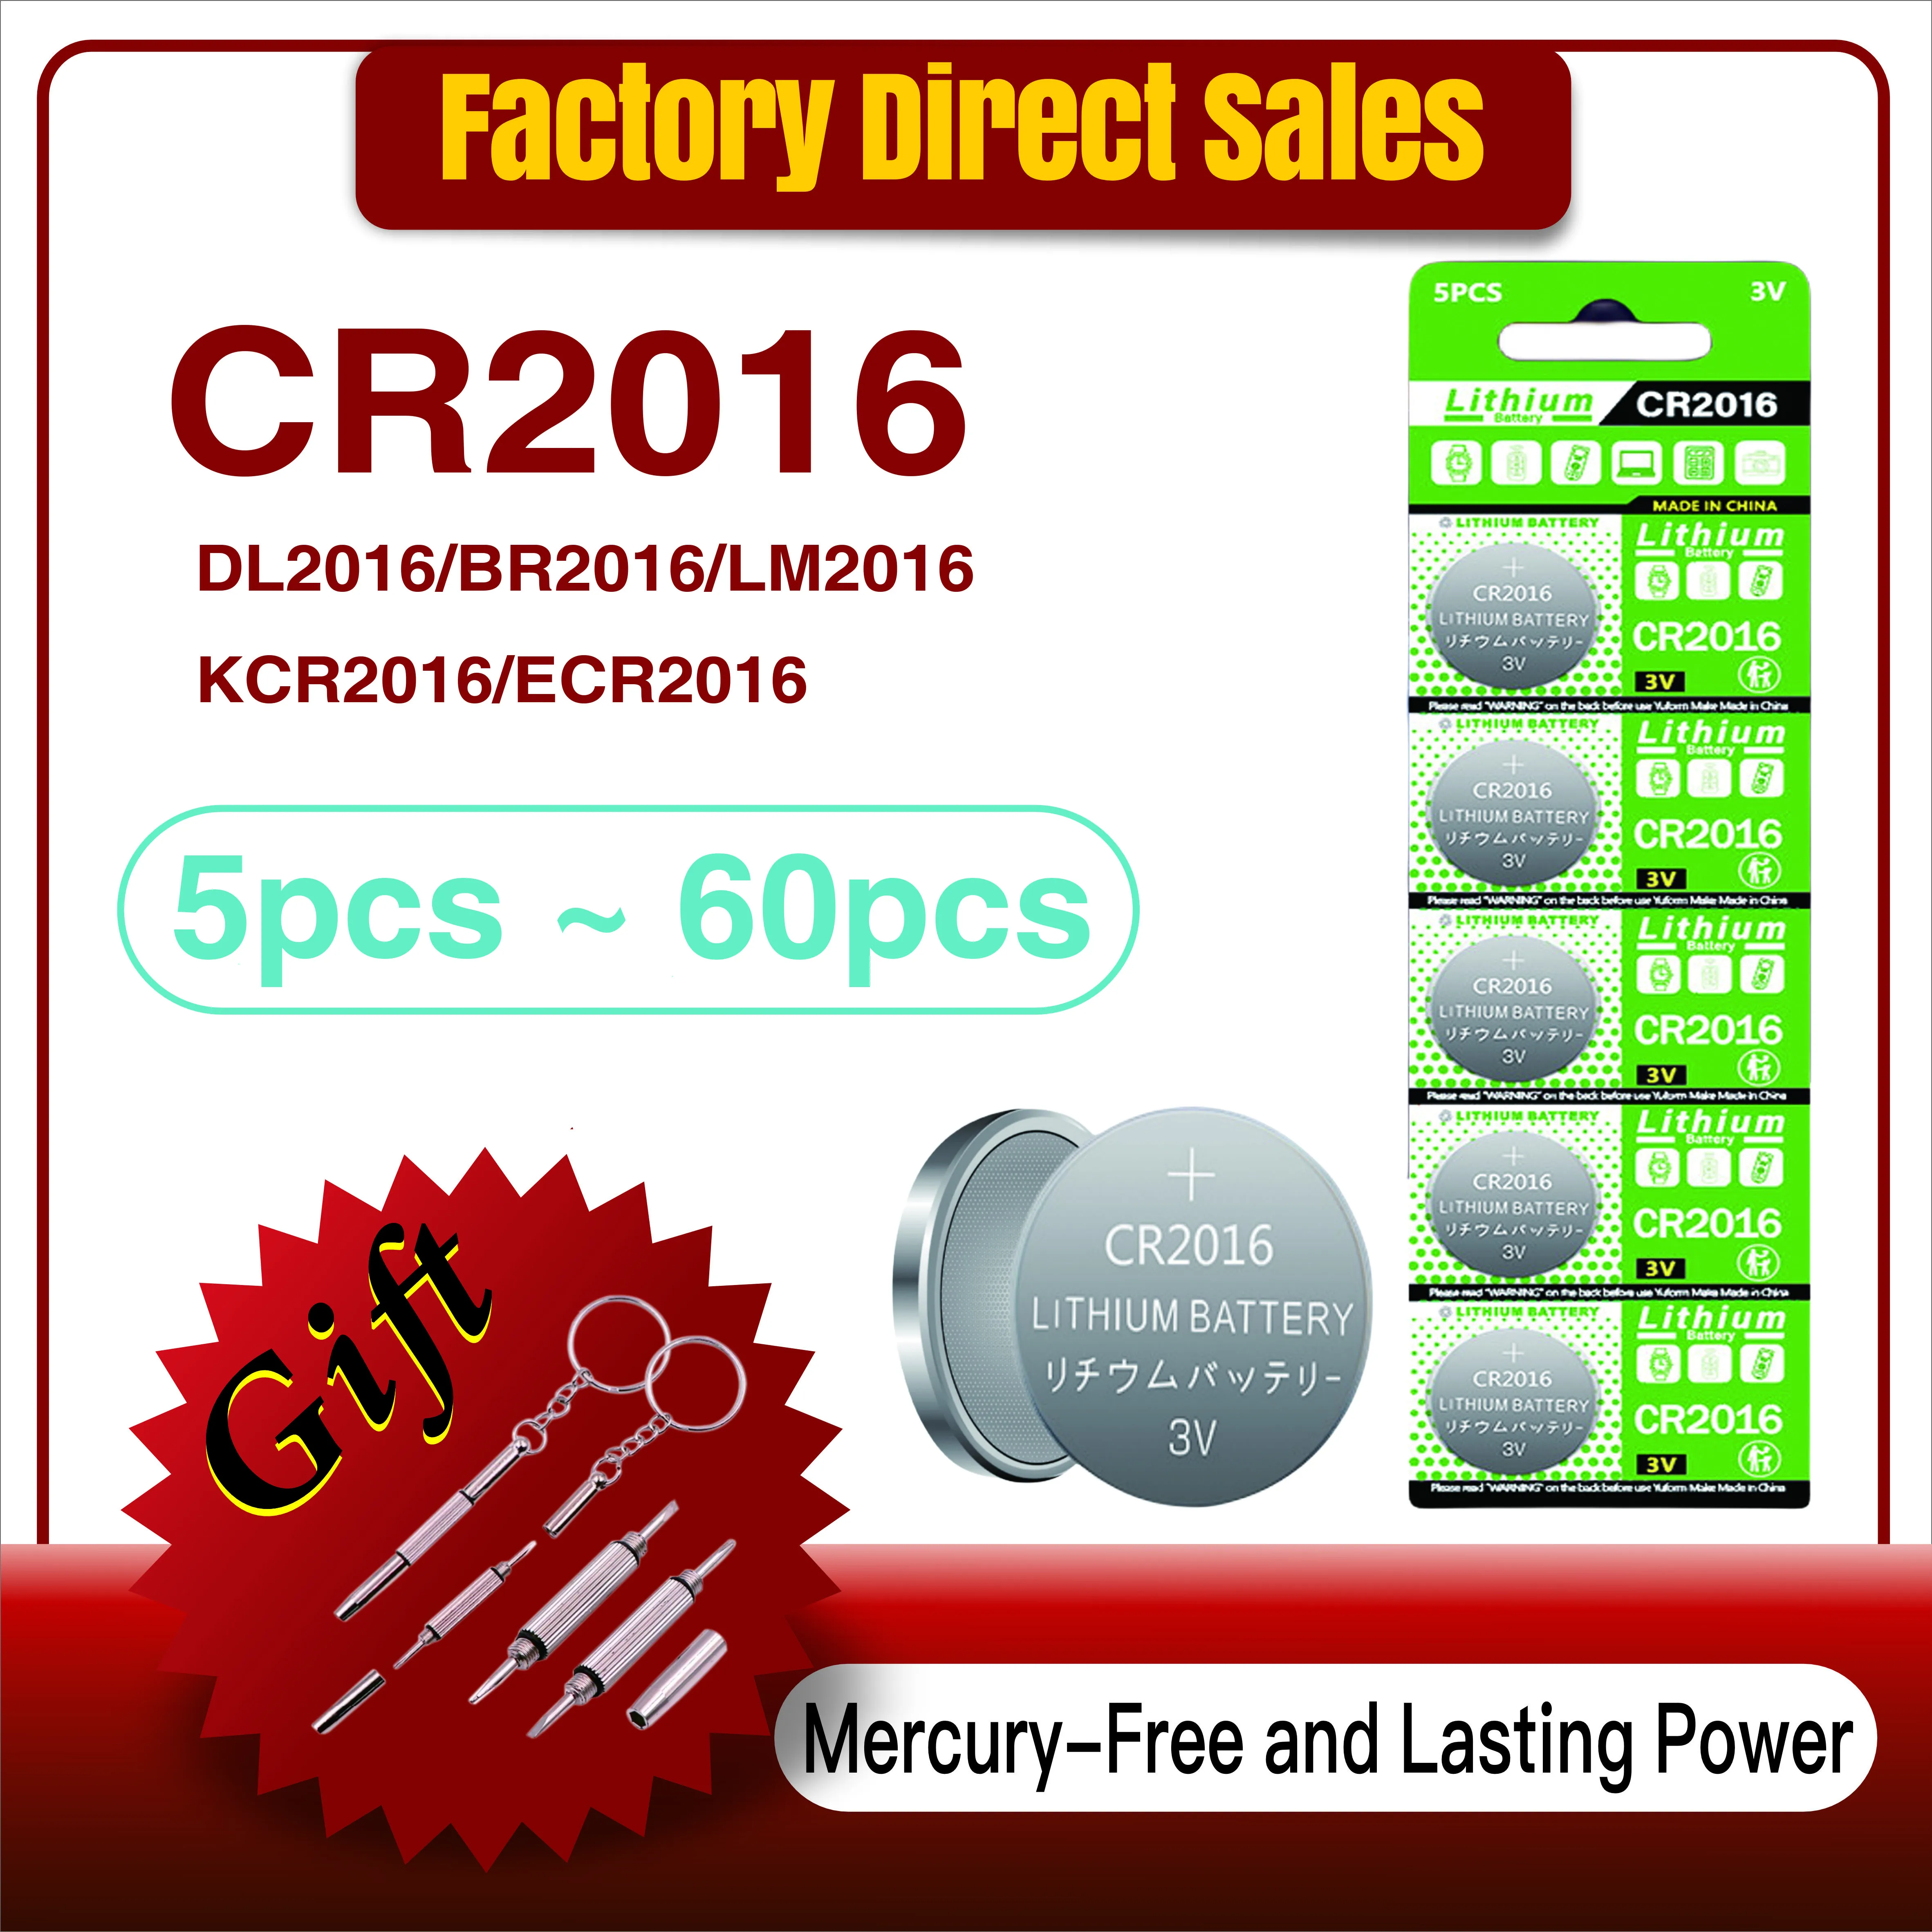 

5-60PCS 3V CR2016 Button Batteries LM2016 BR2016 DL2016 Cell Coin Lithium Battery for Car Keys Watch Electronic Toy Calculators